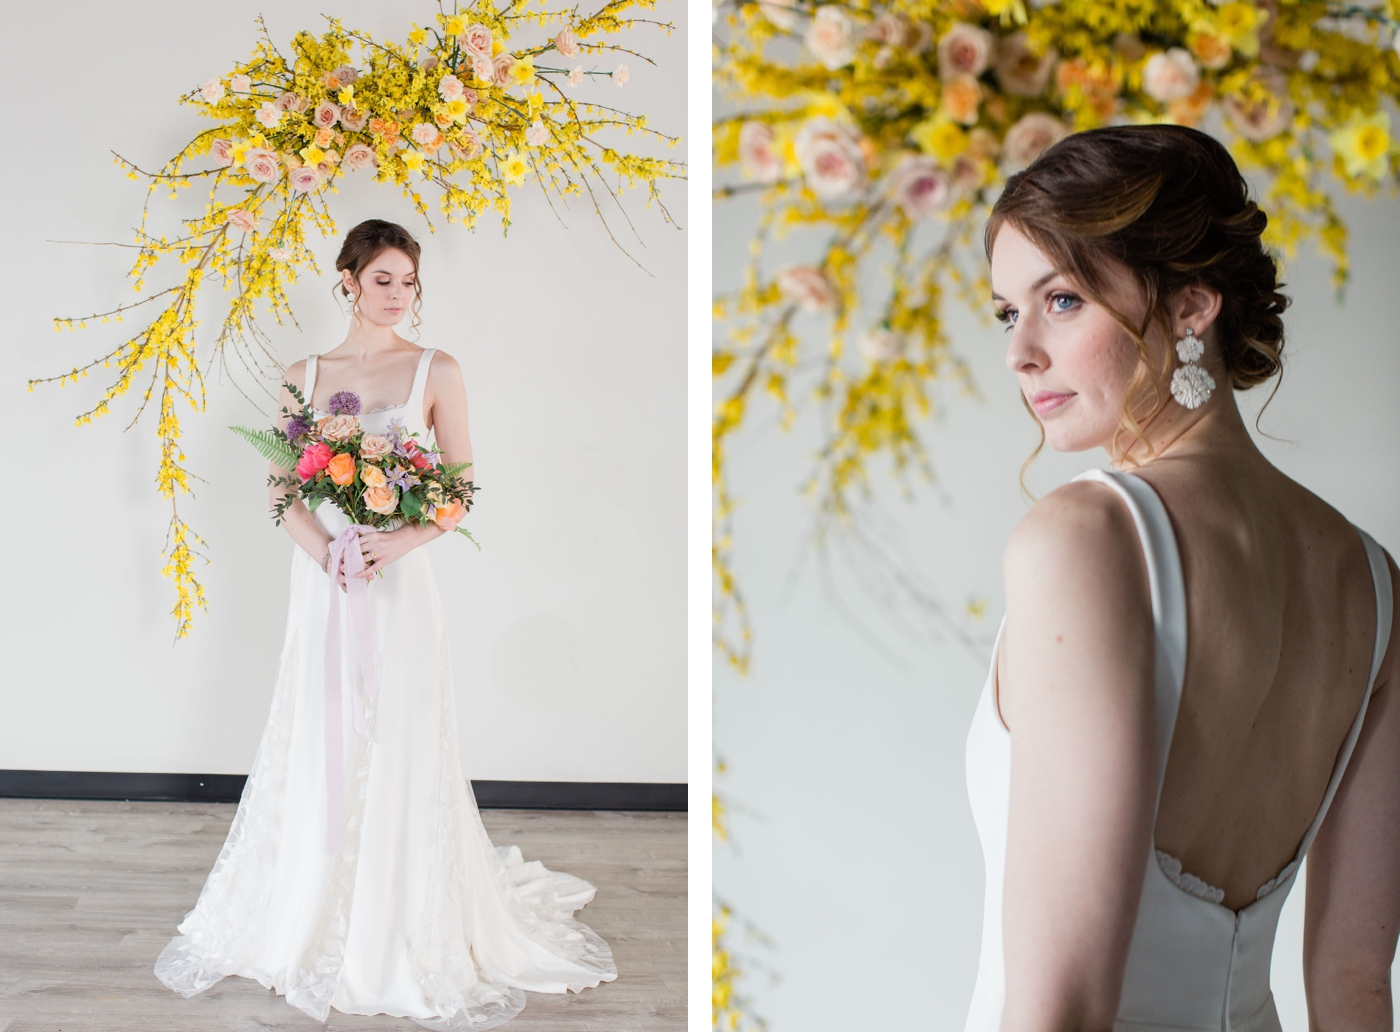 Yellow and lavender wedding flowers by Pistil and Pollen - Photography by Laura Rose Photography | Verve Event Co.